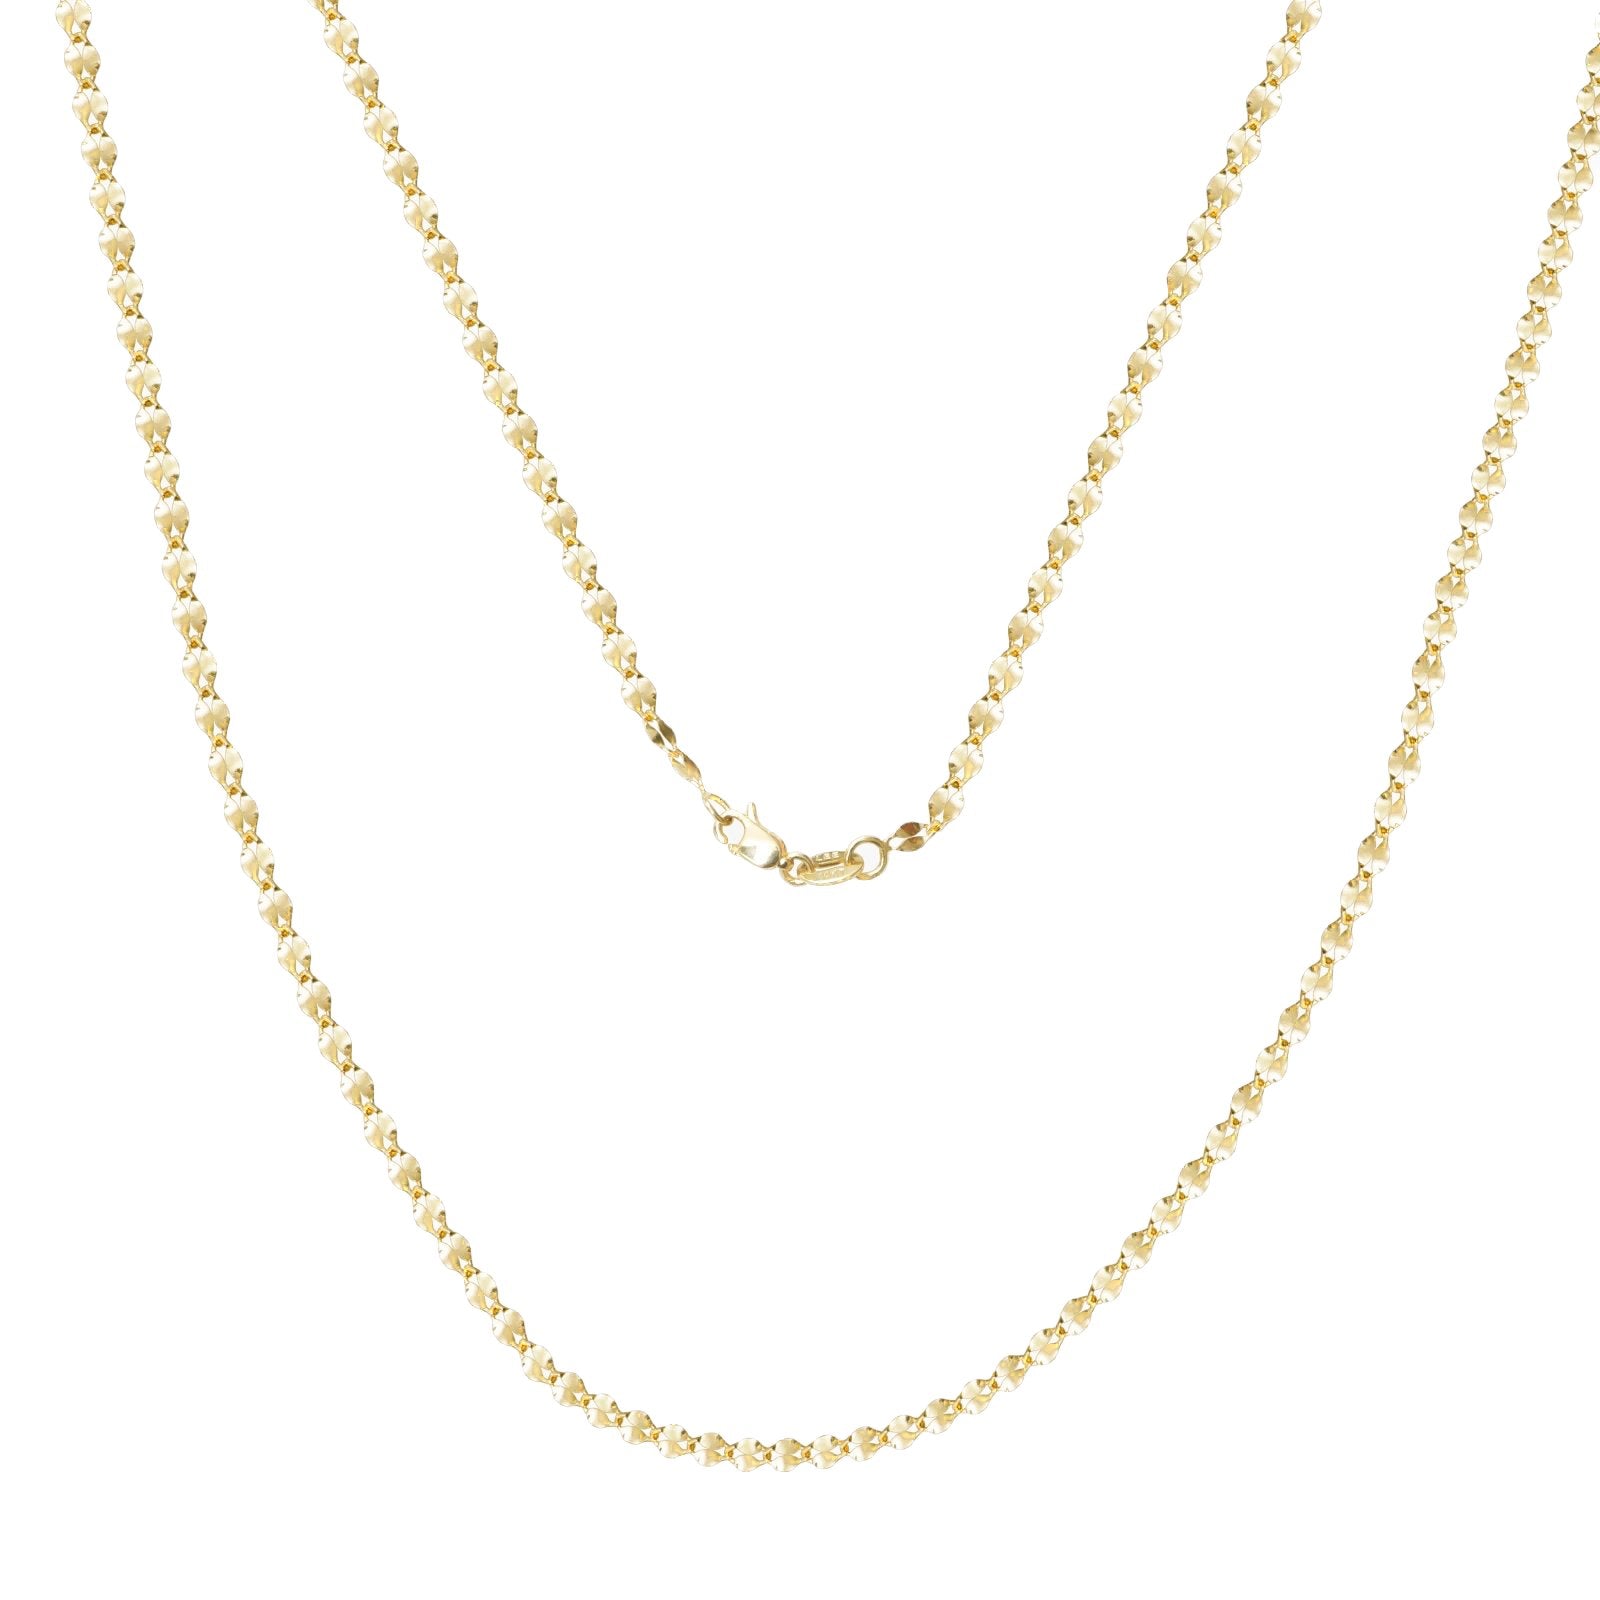 Classic Mirror Chain Necklace in Solid 10k Yellow Gold Necklaces Estella Collection #product_description# 10k 14k Layering Necklace #tag4# #tag5# #tag6# #tag7# #tag8# #tag9# #tag10#